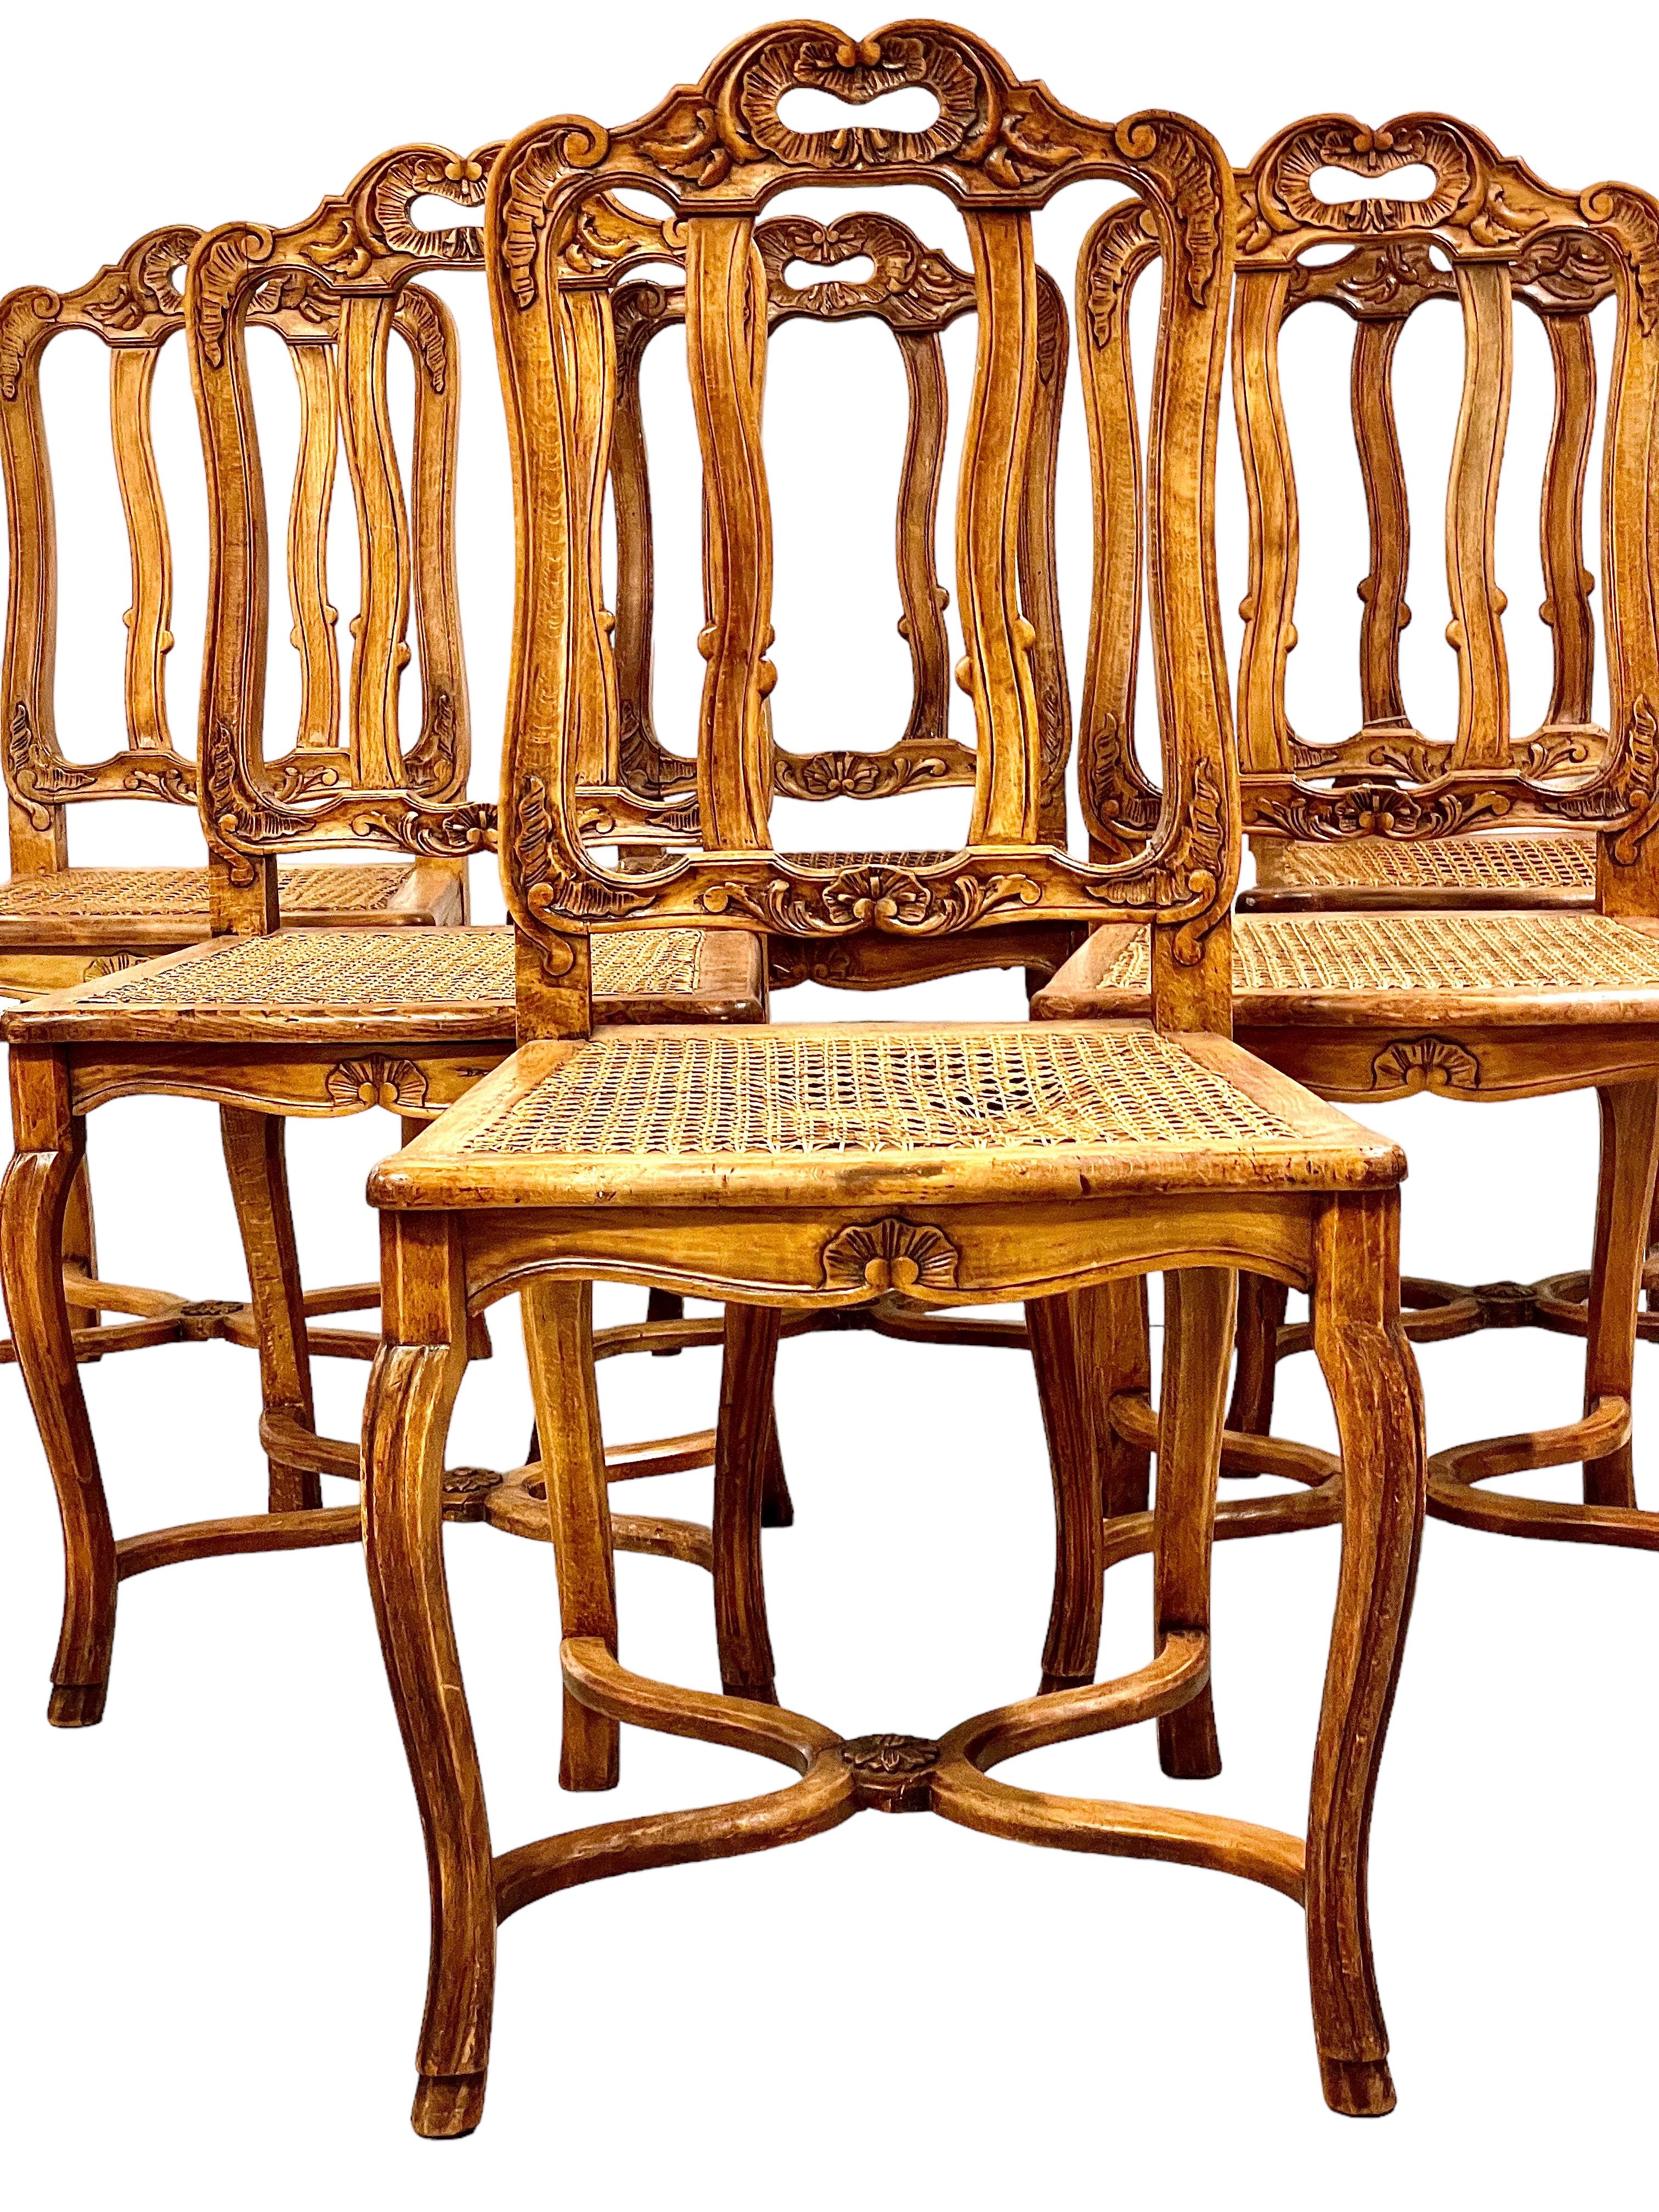 This exquisite suite of six Louis XV-style dining room chairs features a stunning display of elegant craftsmanship and intricate carving in high-quality walnut hardwood. The delicately moulded and carved details of each chair enhance the overall